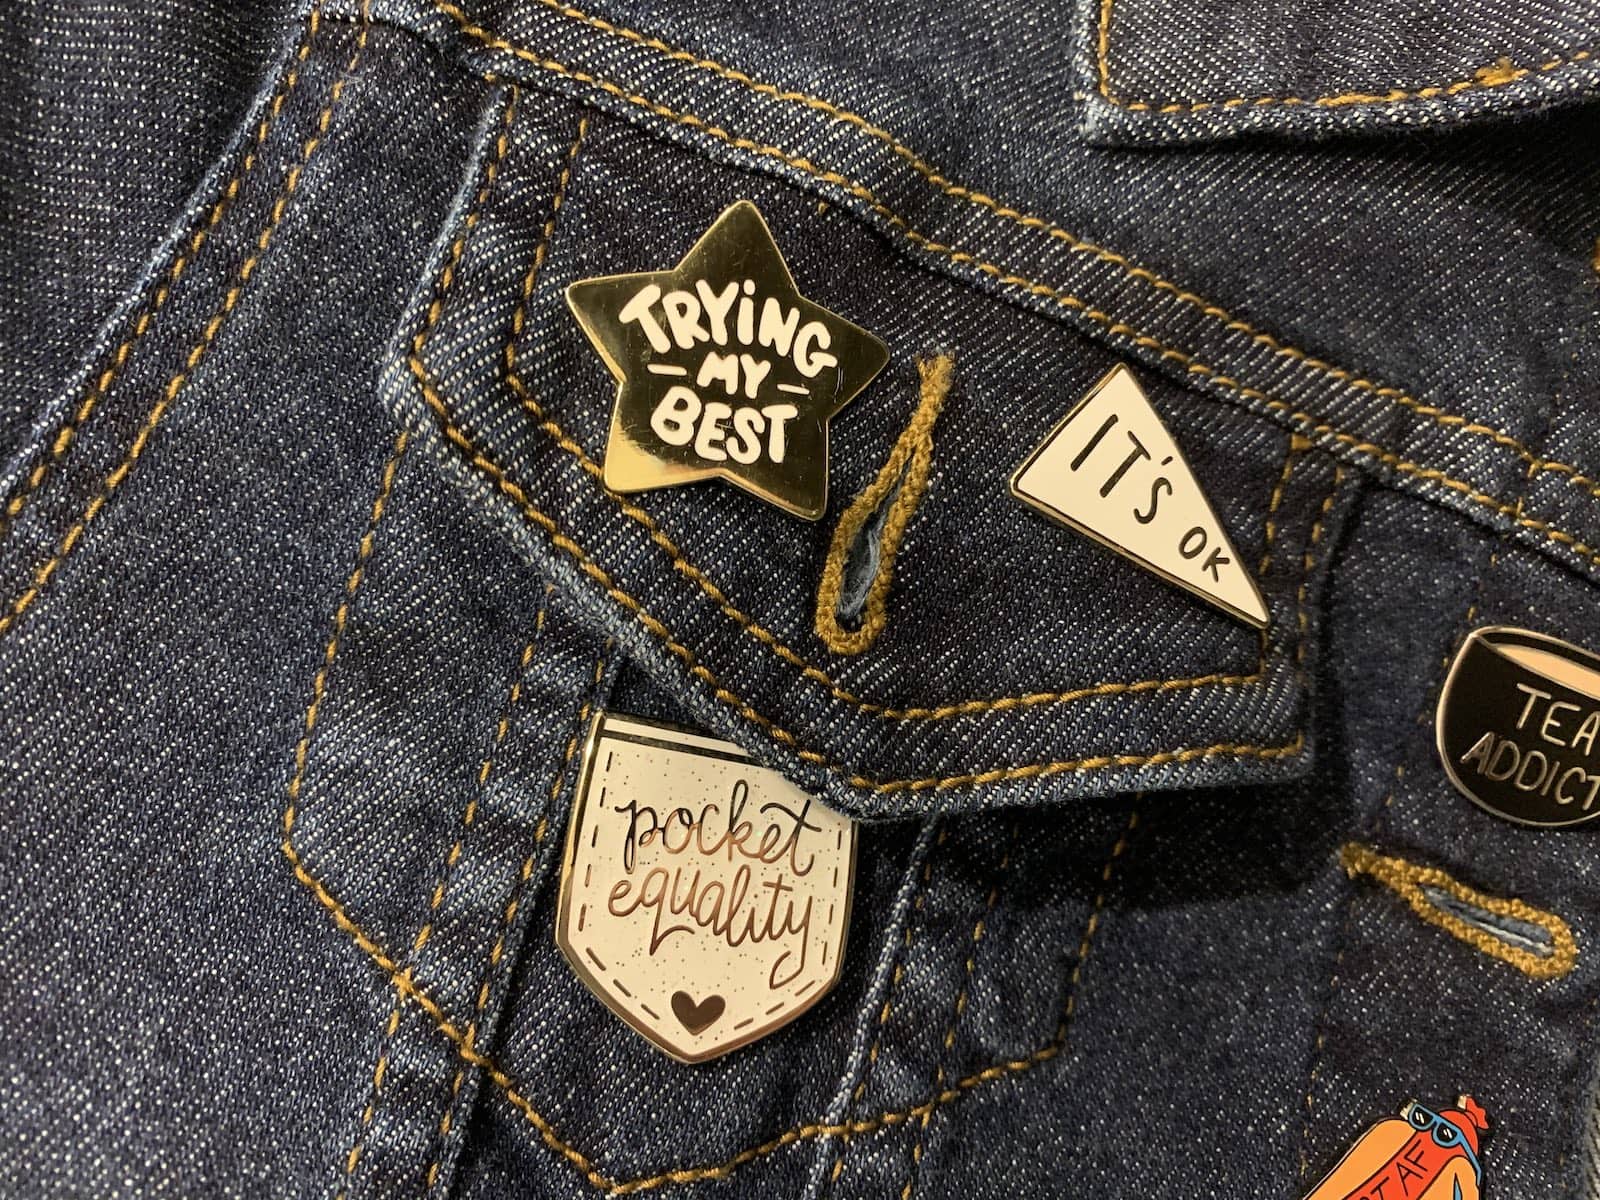 Part of a dark denim jacket with two pins in view: a pennant flag reading “It’s OK” and a star reading “Trying my best”.